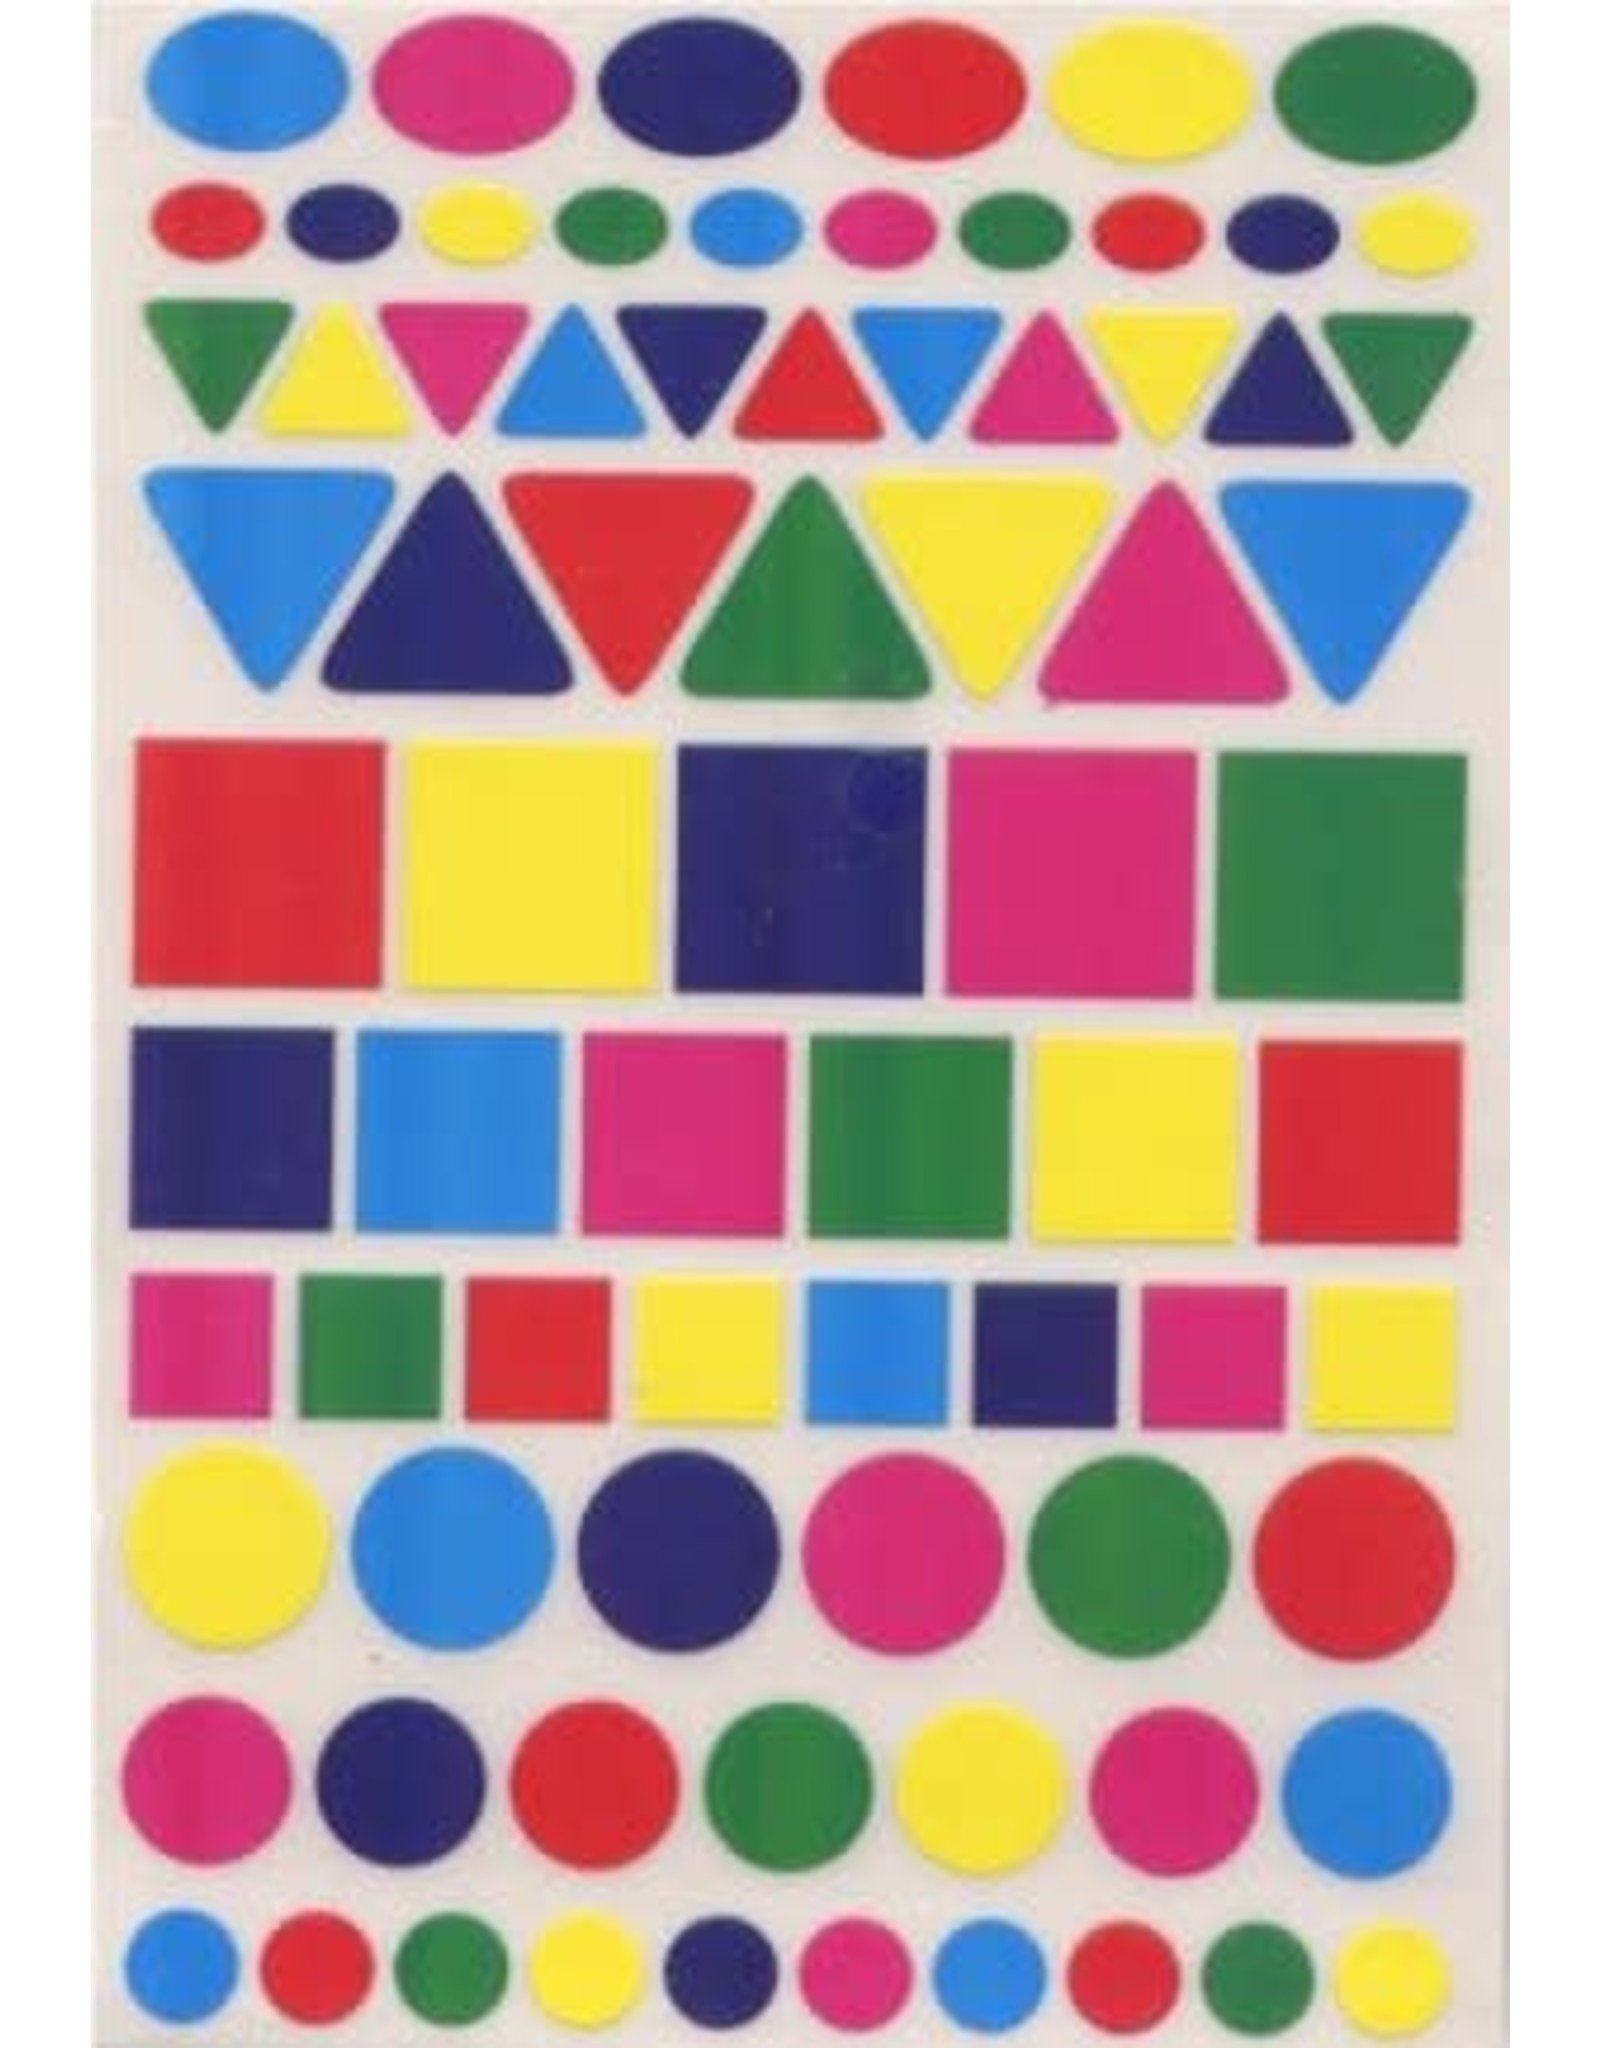 COLOR CODING STICKERS: SMALL ASSORTED SHAPES  - 25 SHEETS